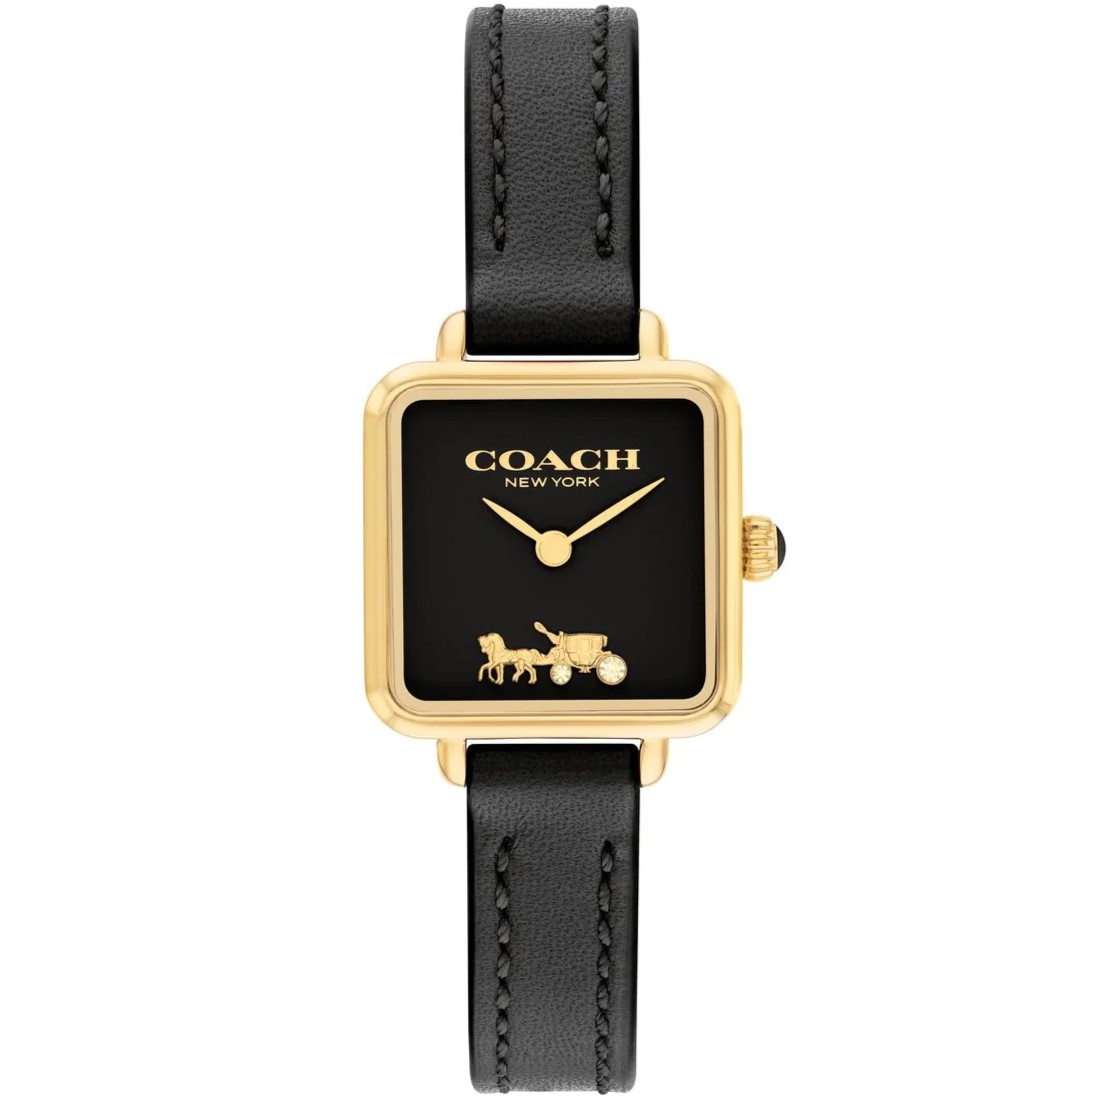 ĐỒNG HỒ NỮ COACH CASS SIGNATURE HORSE AND CARRIAGE ION-PLATED GOLDTONE STEEL AND BLACK LEATHER STRAP WATCH 14504225 2